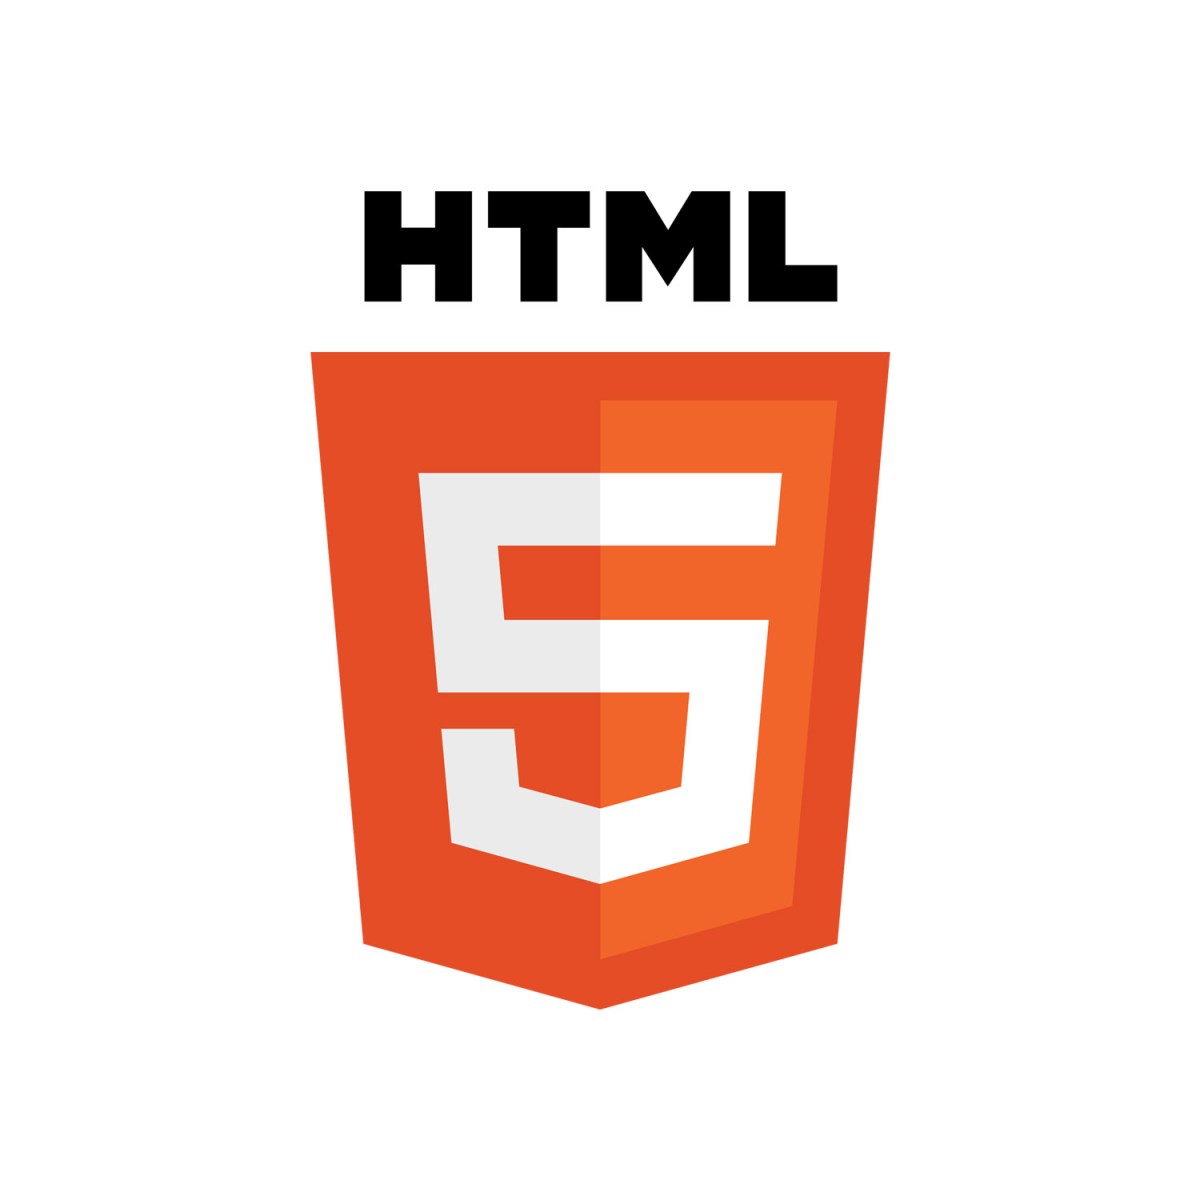 Dalya Kandil can code web pages, apps and frameworks using HTML5.